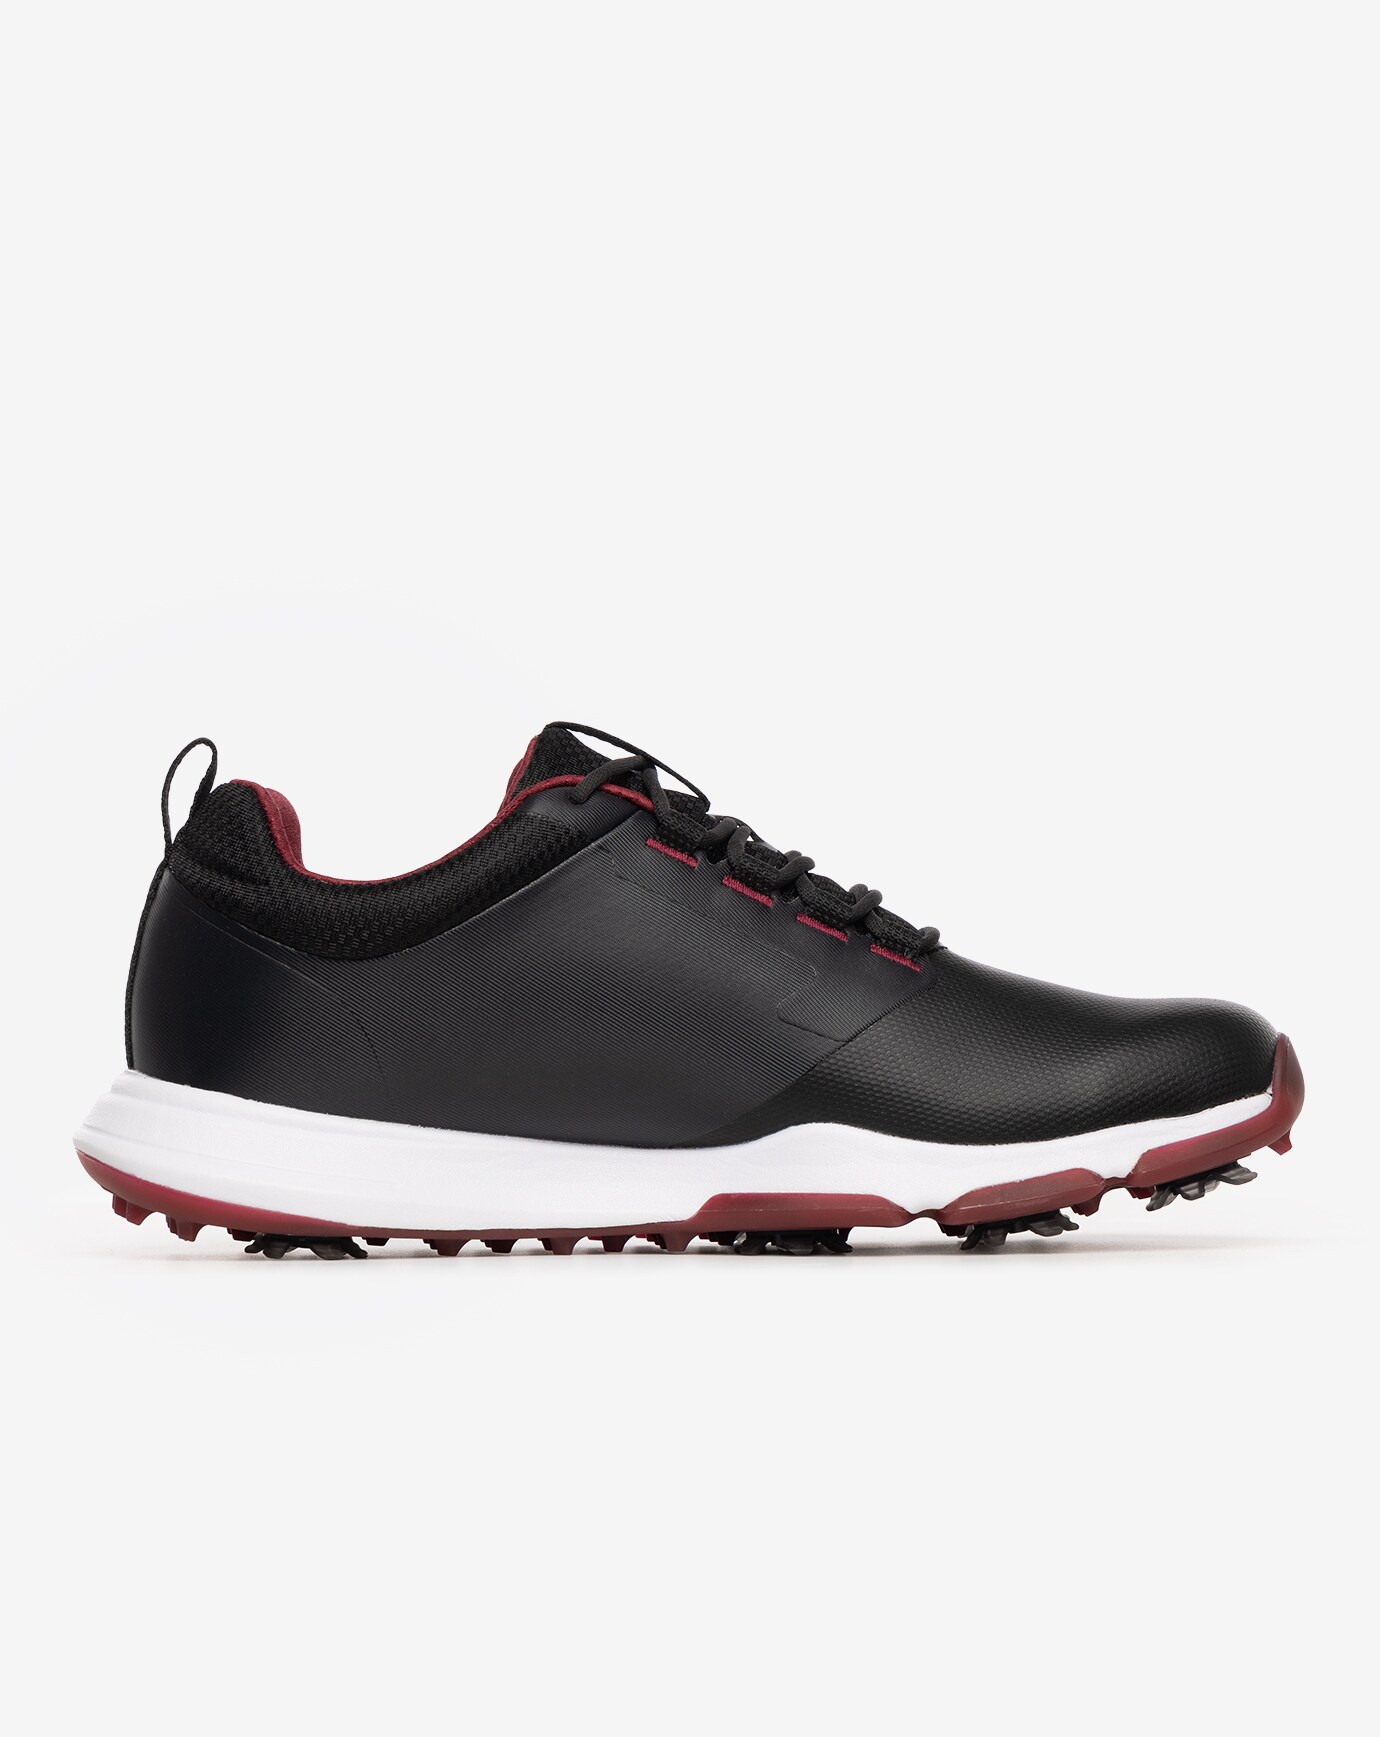 THE RINGER SPIKED GOLF SHOE Image 3